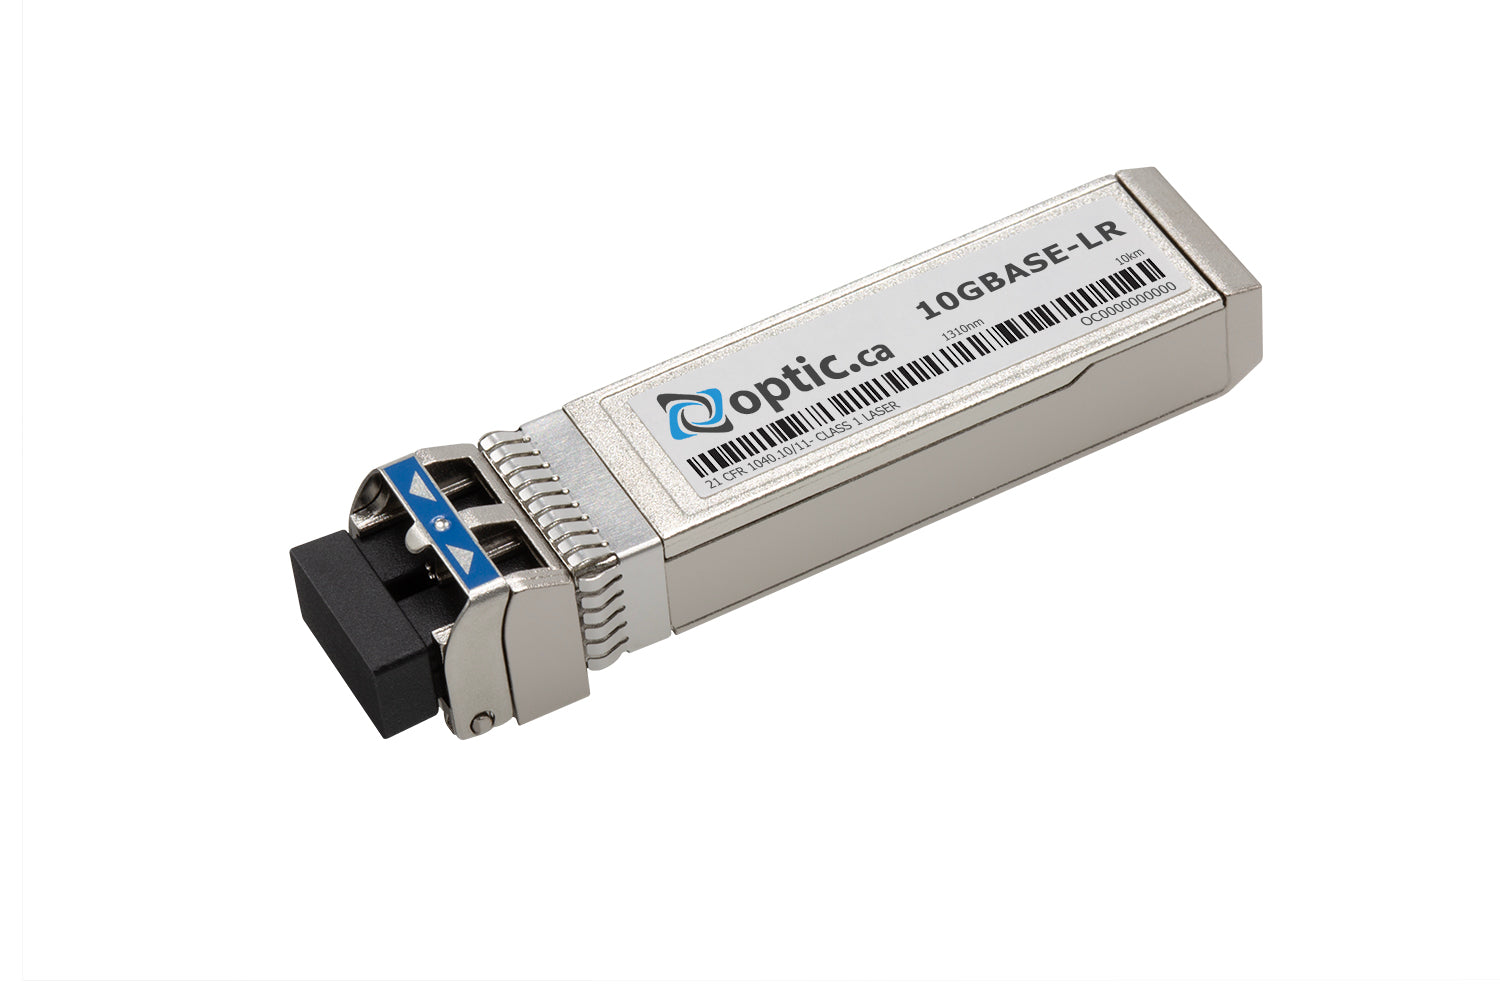 OPTIC.CA - 10GBASE-LR SFP+ - CPAC-TR-10LR-OC - CHECK POINT COMPATIBLE